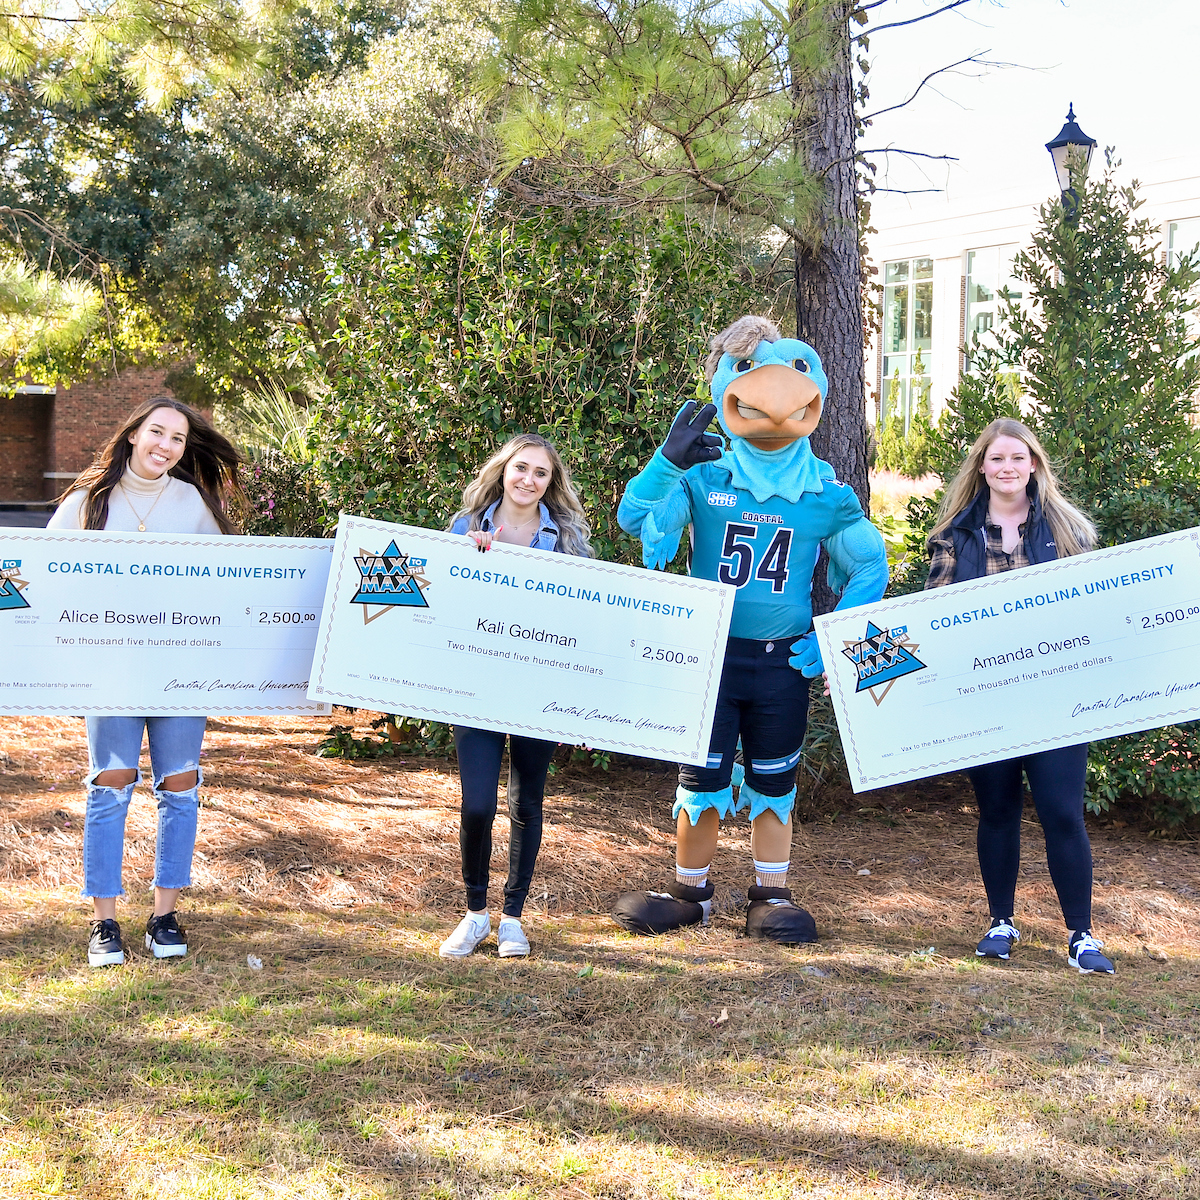 This week's Vax to the Max scholarship winners include Alice Boswell Brown, Kali Goldman, and Amanda Owens.